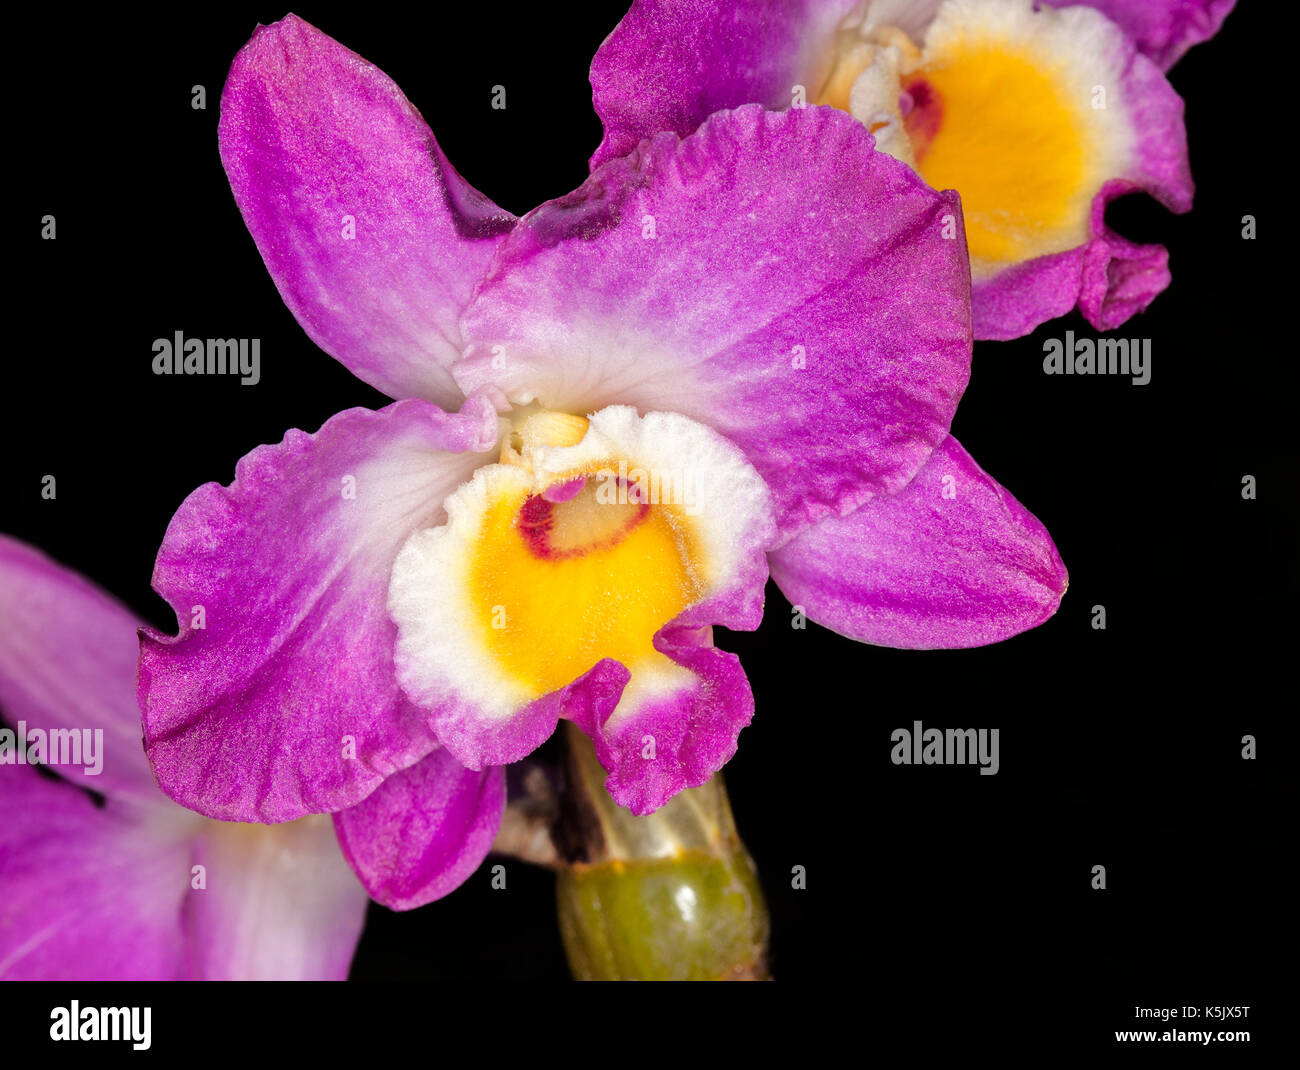 Stunning flower of orchid, Dendrobium Elegant Smile 'Red Crest, with vivid magenta / purple petals & yellow & white centre on black background Stock Photo